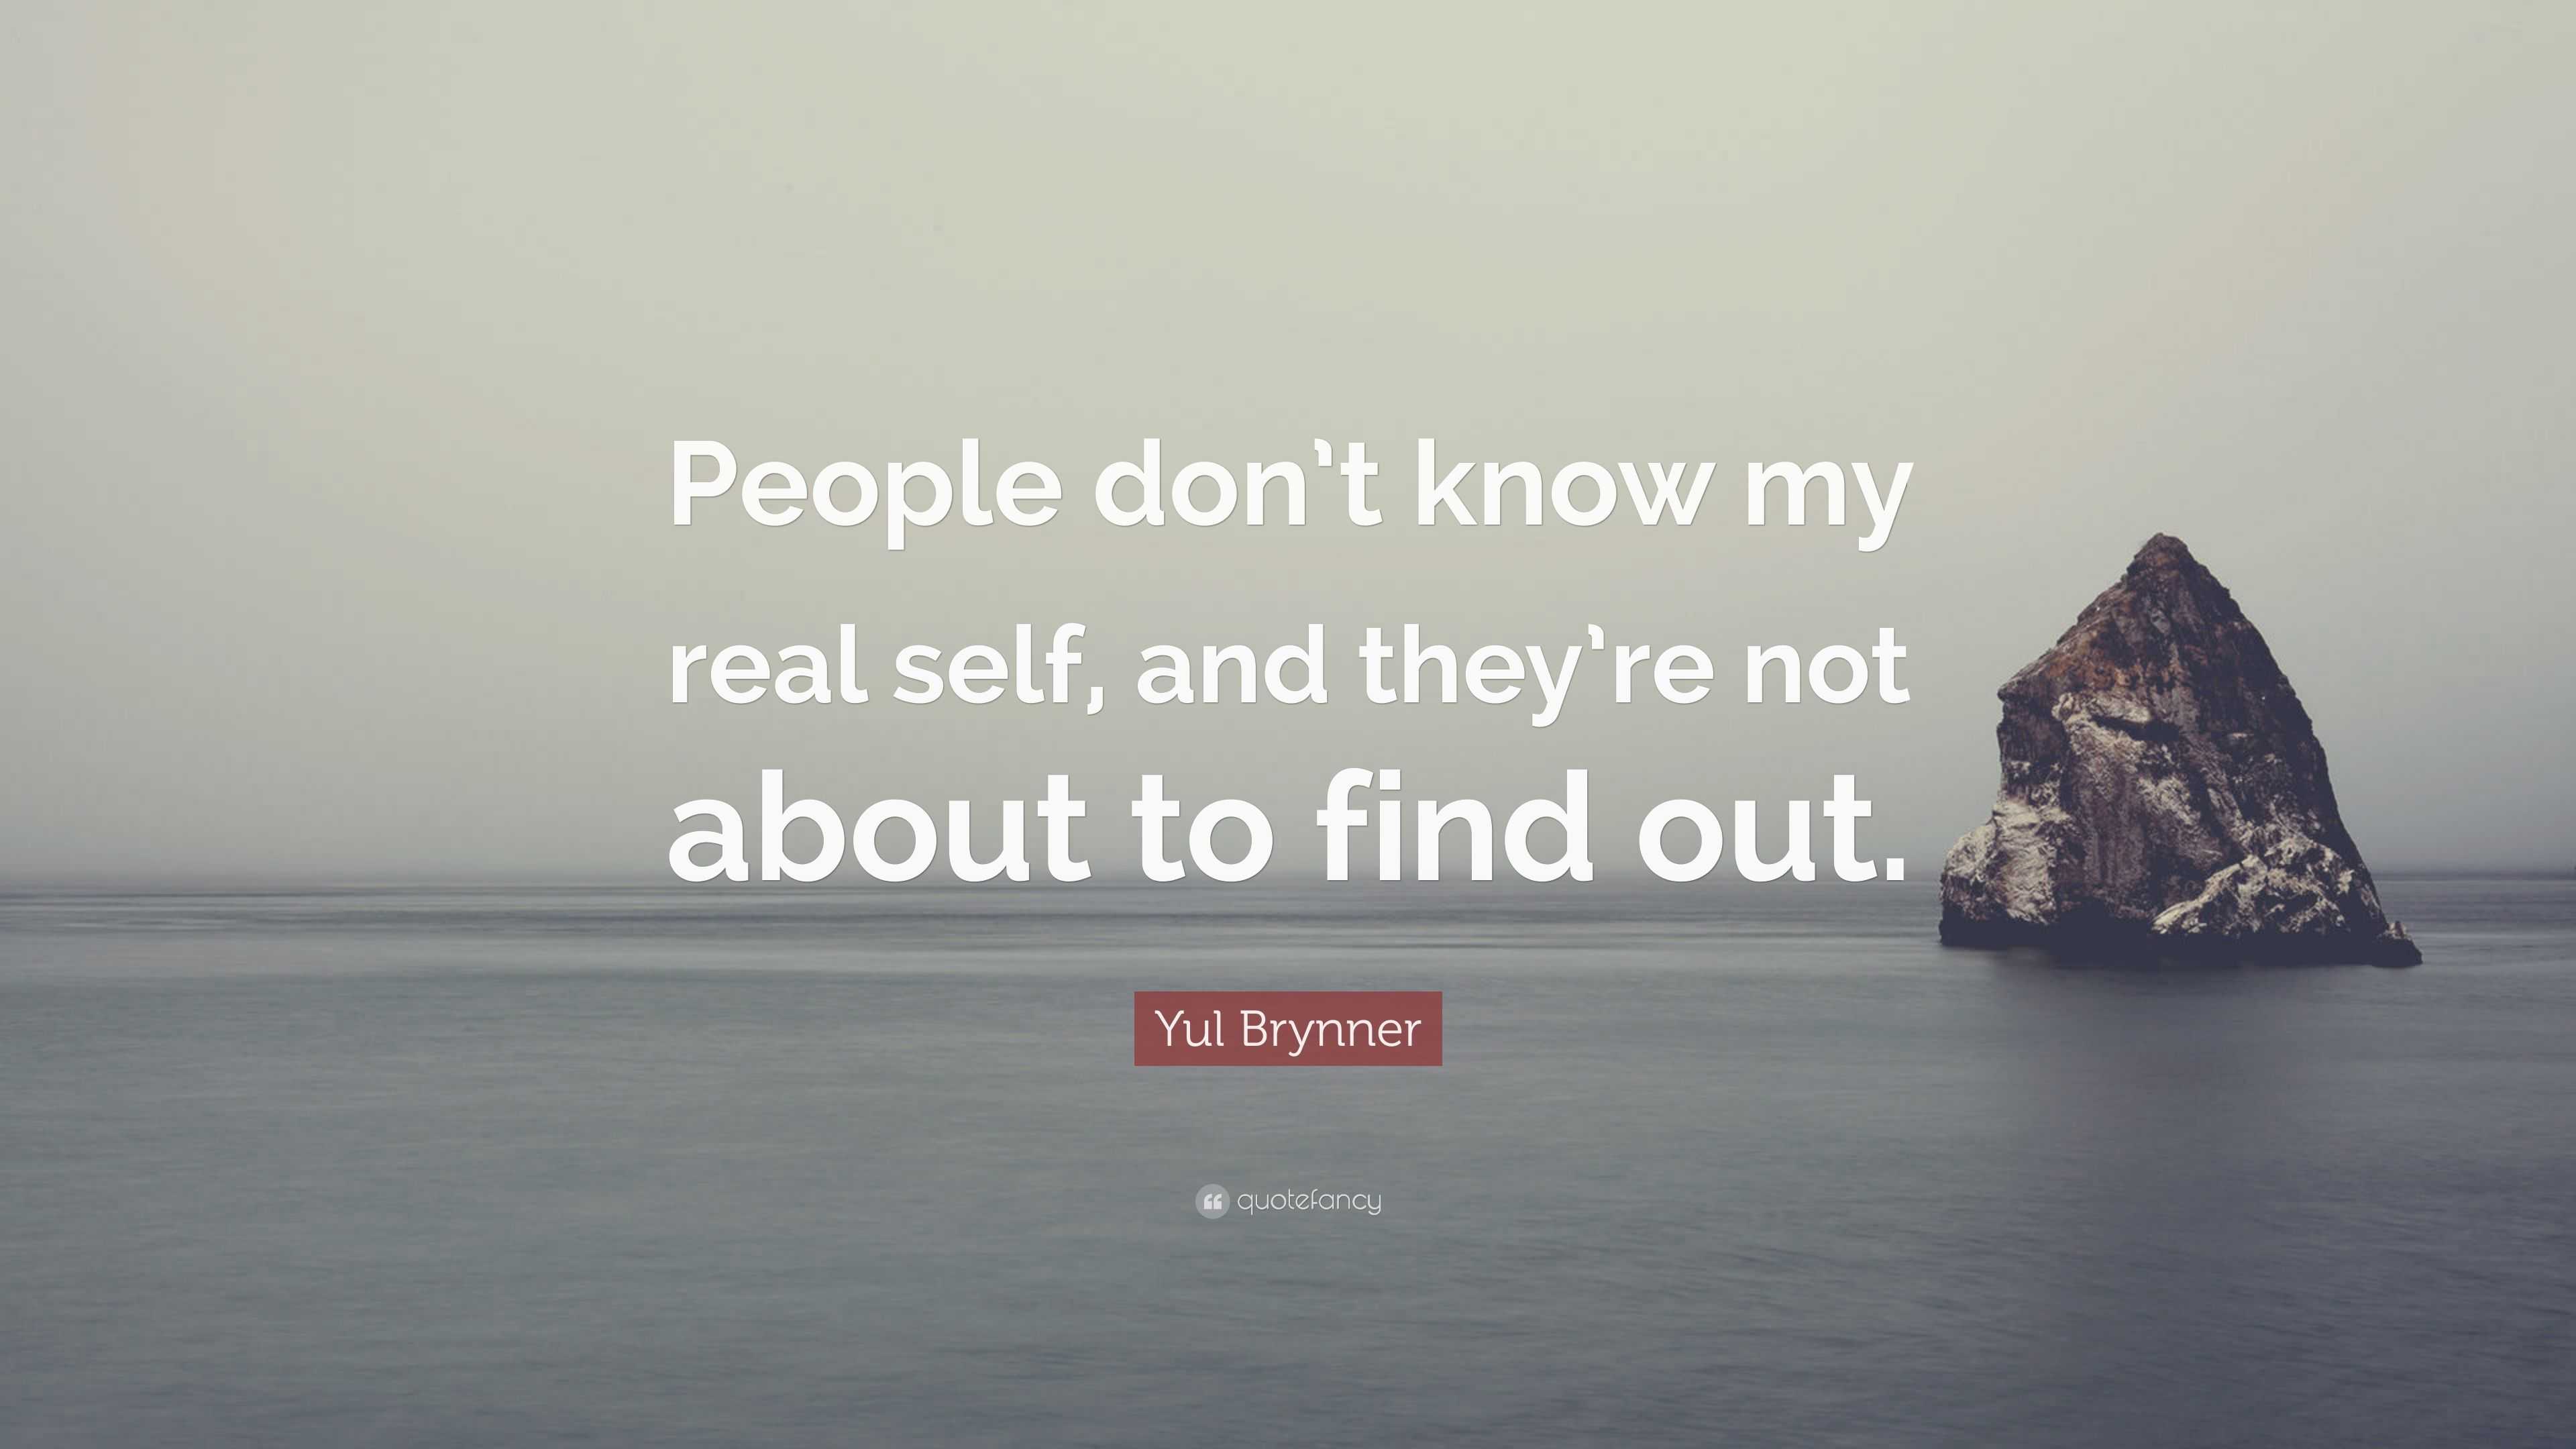 Yul Brynner Quote: “People don’t know my real self, and they’re not ...